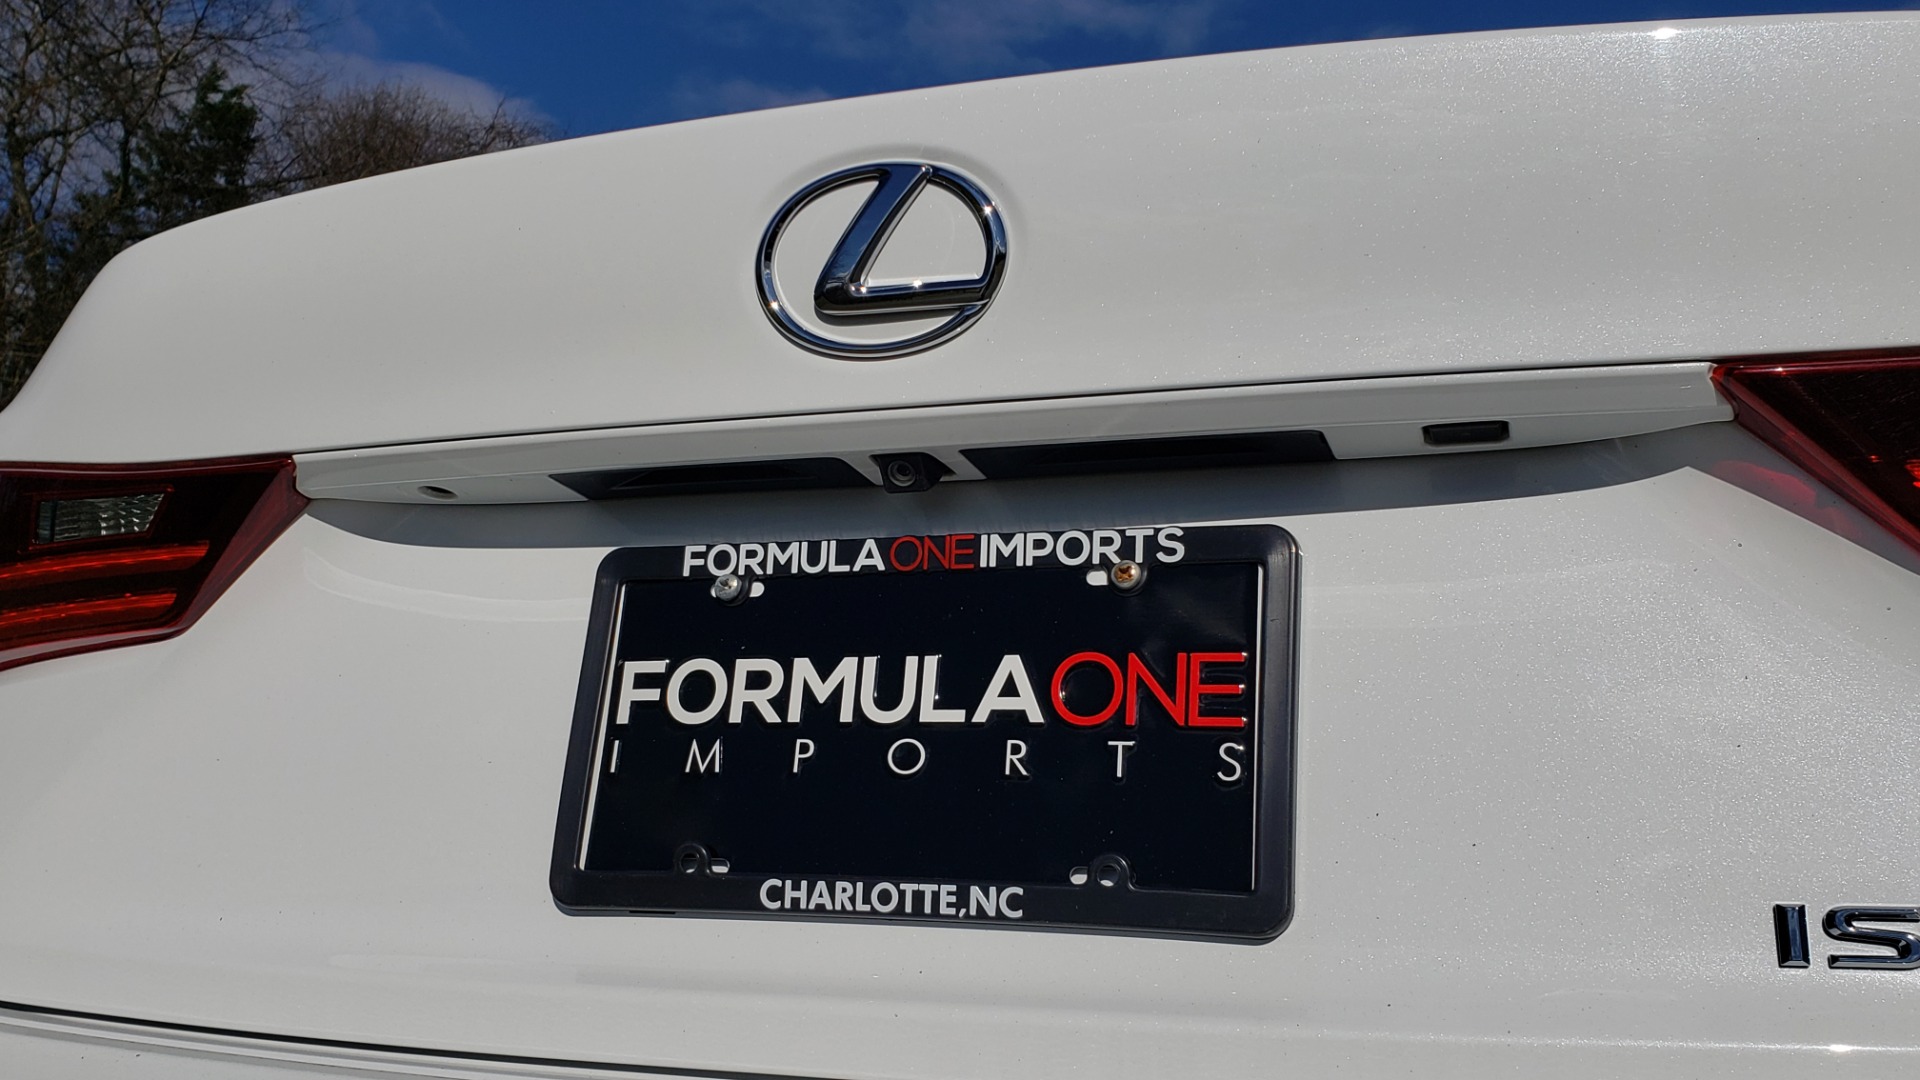 Used 2014 Lexus IS 250 F-SPORT / NAV / SUNROOF / REARVIEW / BSM for sale Sold at Formula Imports in Charlotte NC 28227 19